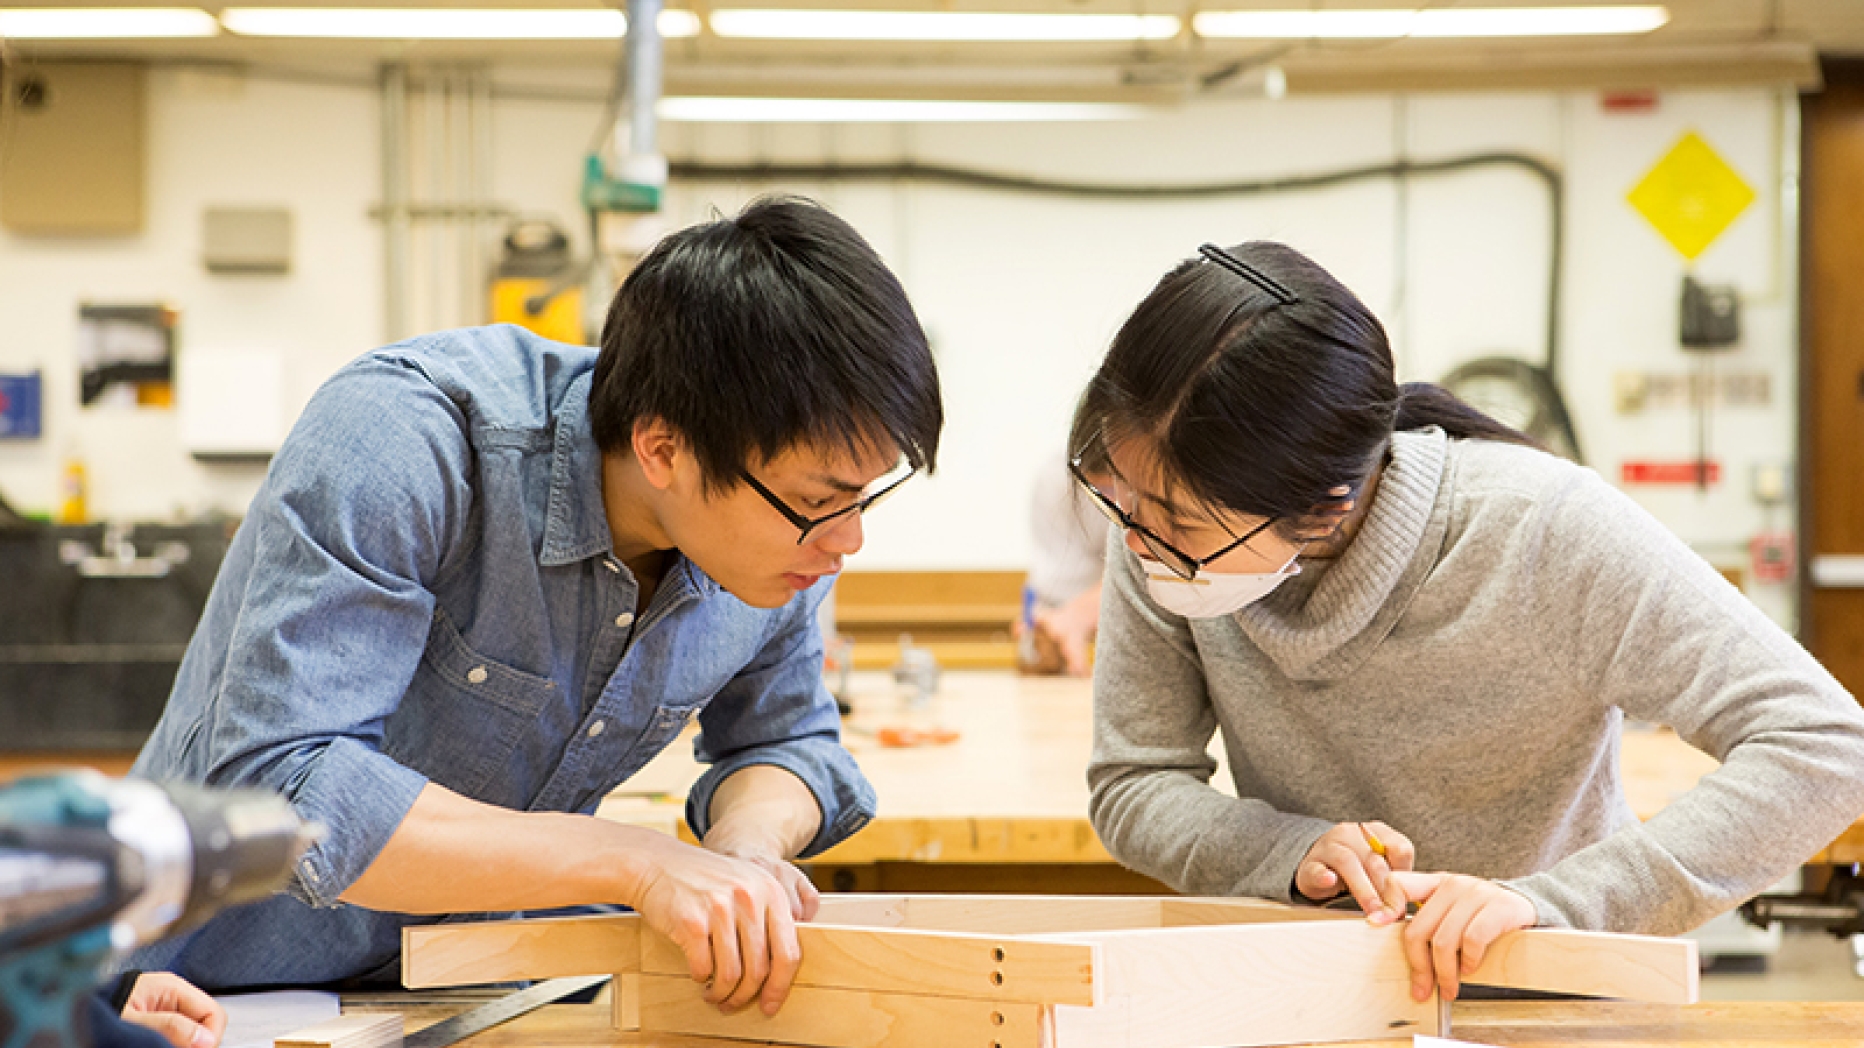 Two students working together on a wooden frame a studio